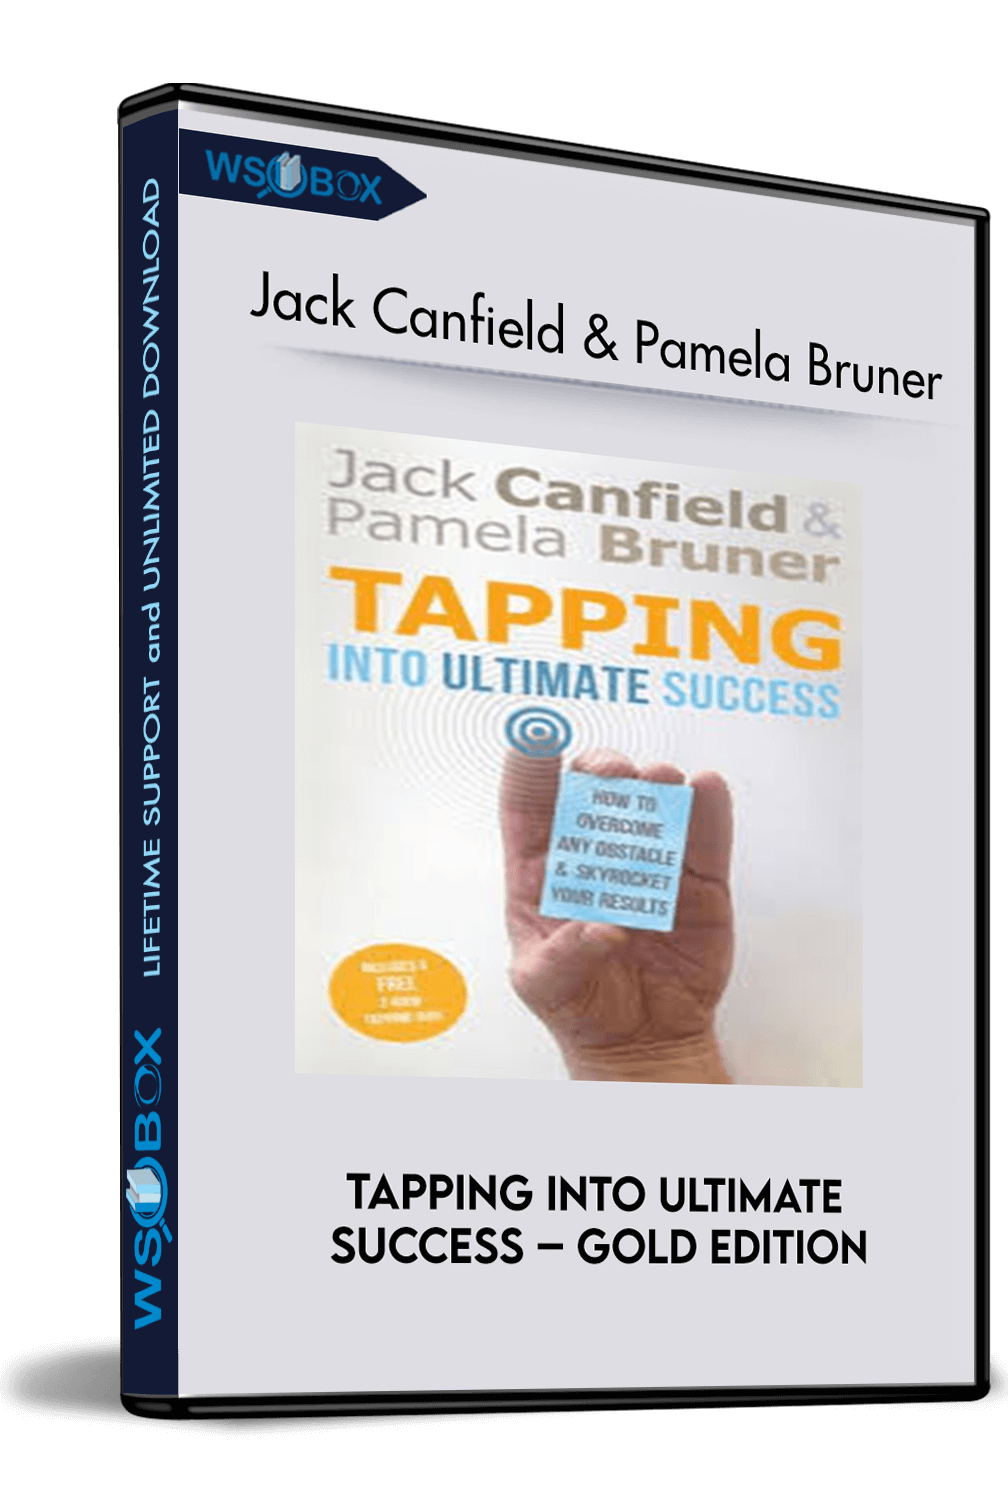 tapping-into-ultimate-success-gold-edition-jack-canfield-and-pamela-bruner